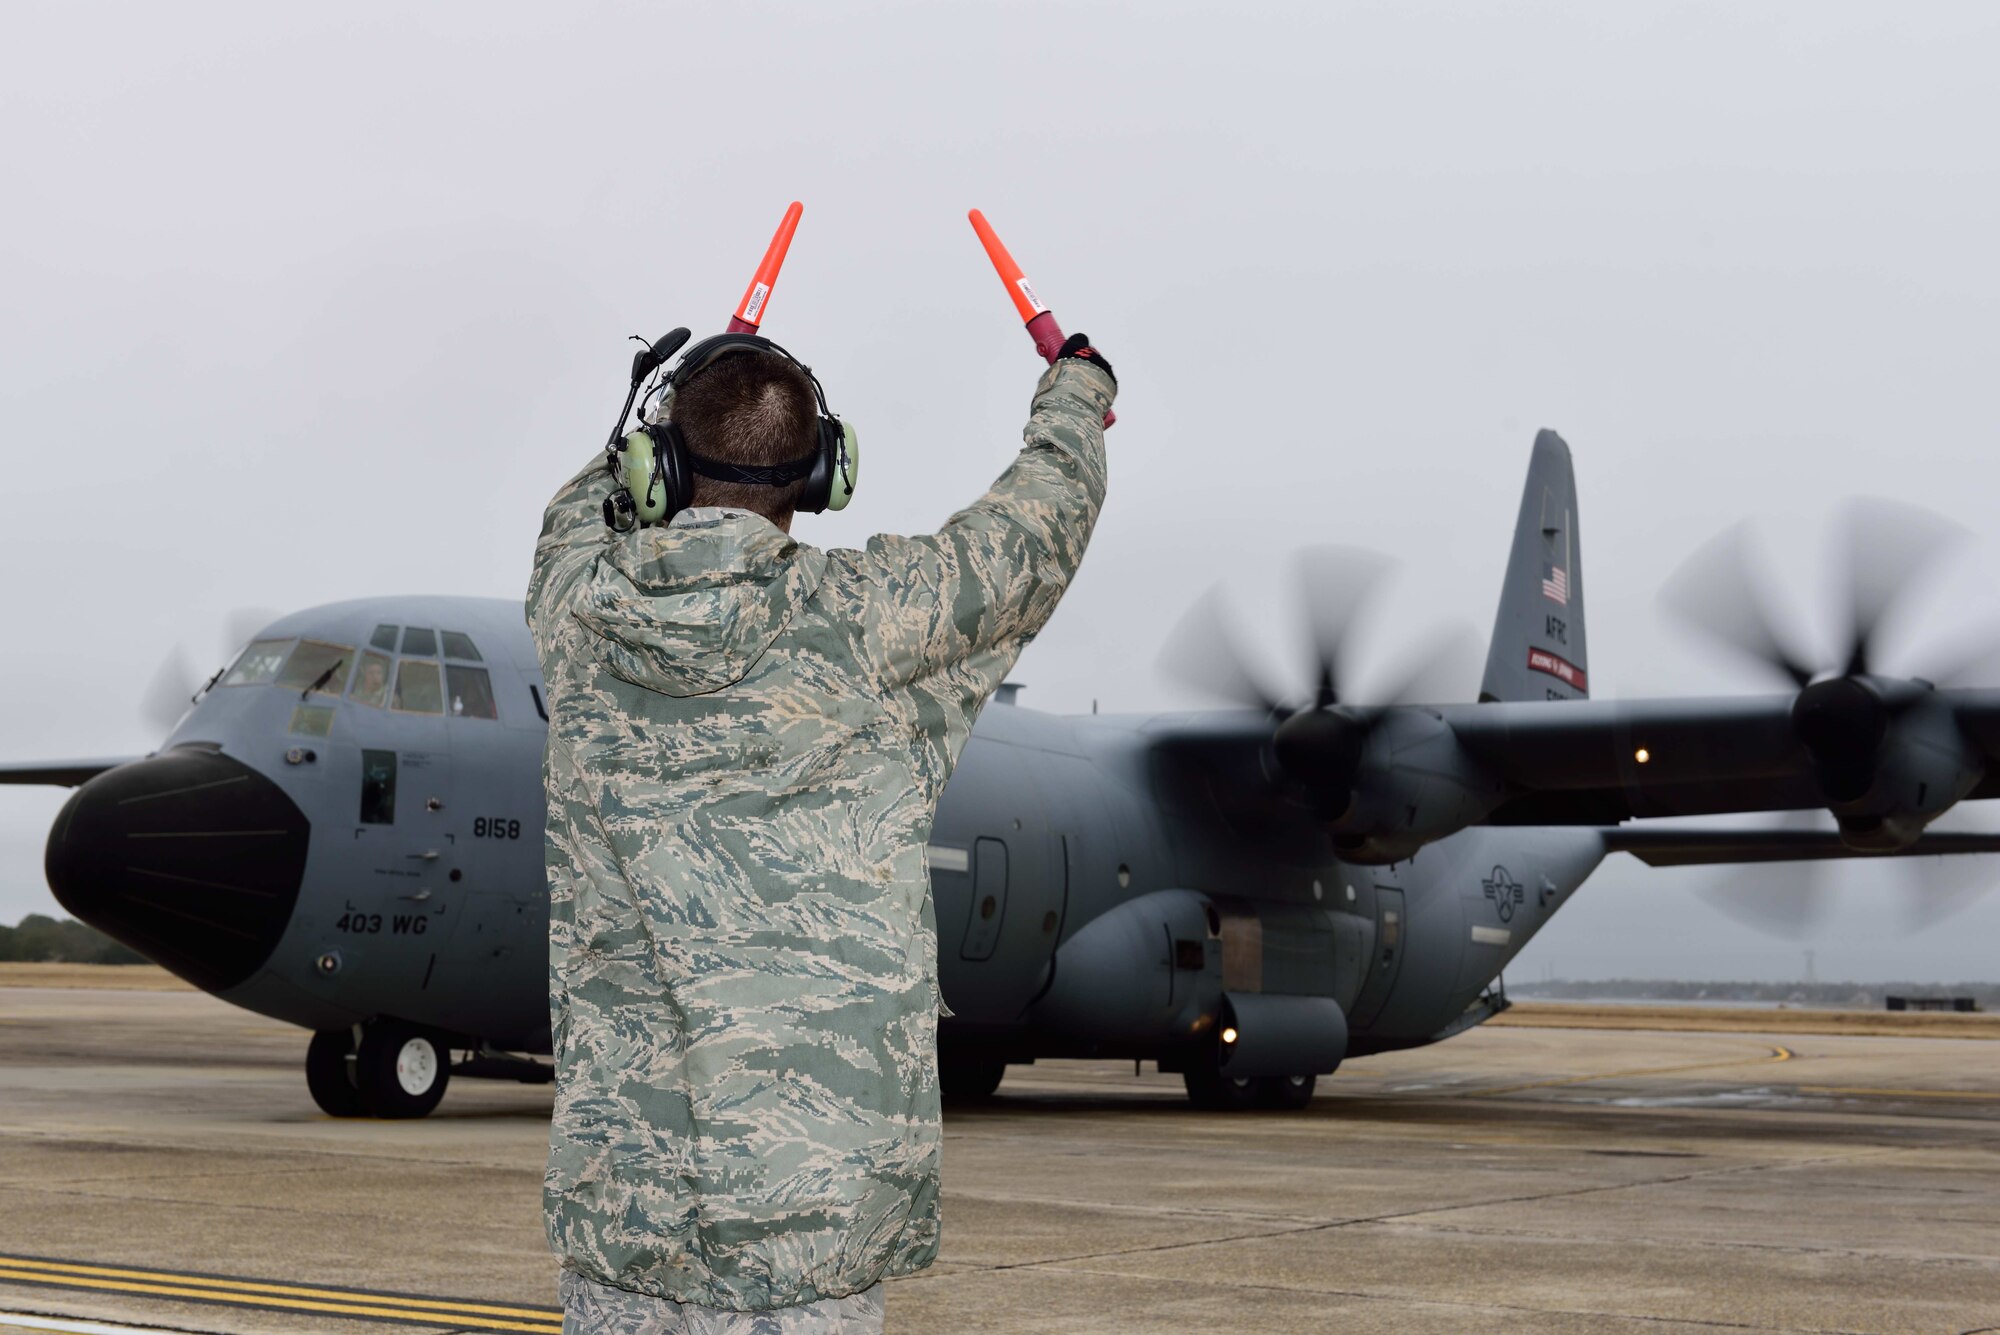 Aircrew members of the 815th Airlift Squadron taxi a C-130J Super Hercules aircraft onto the flight line Jan. 8, 2018, in preparation for takeoff for their deployment to Southwest Asia. Approximately 150 Air Force Reserve Citizen Airmen and several C-130J Super Hercules aircraft from the 403rd Wing have deployed to Southwest Asia in Support of Operations Freedom’s Sentinel and Inherent Resolve. (U.S. Air Force photo by Tech. Sgt. Ryan Labadens)